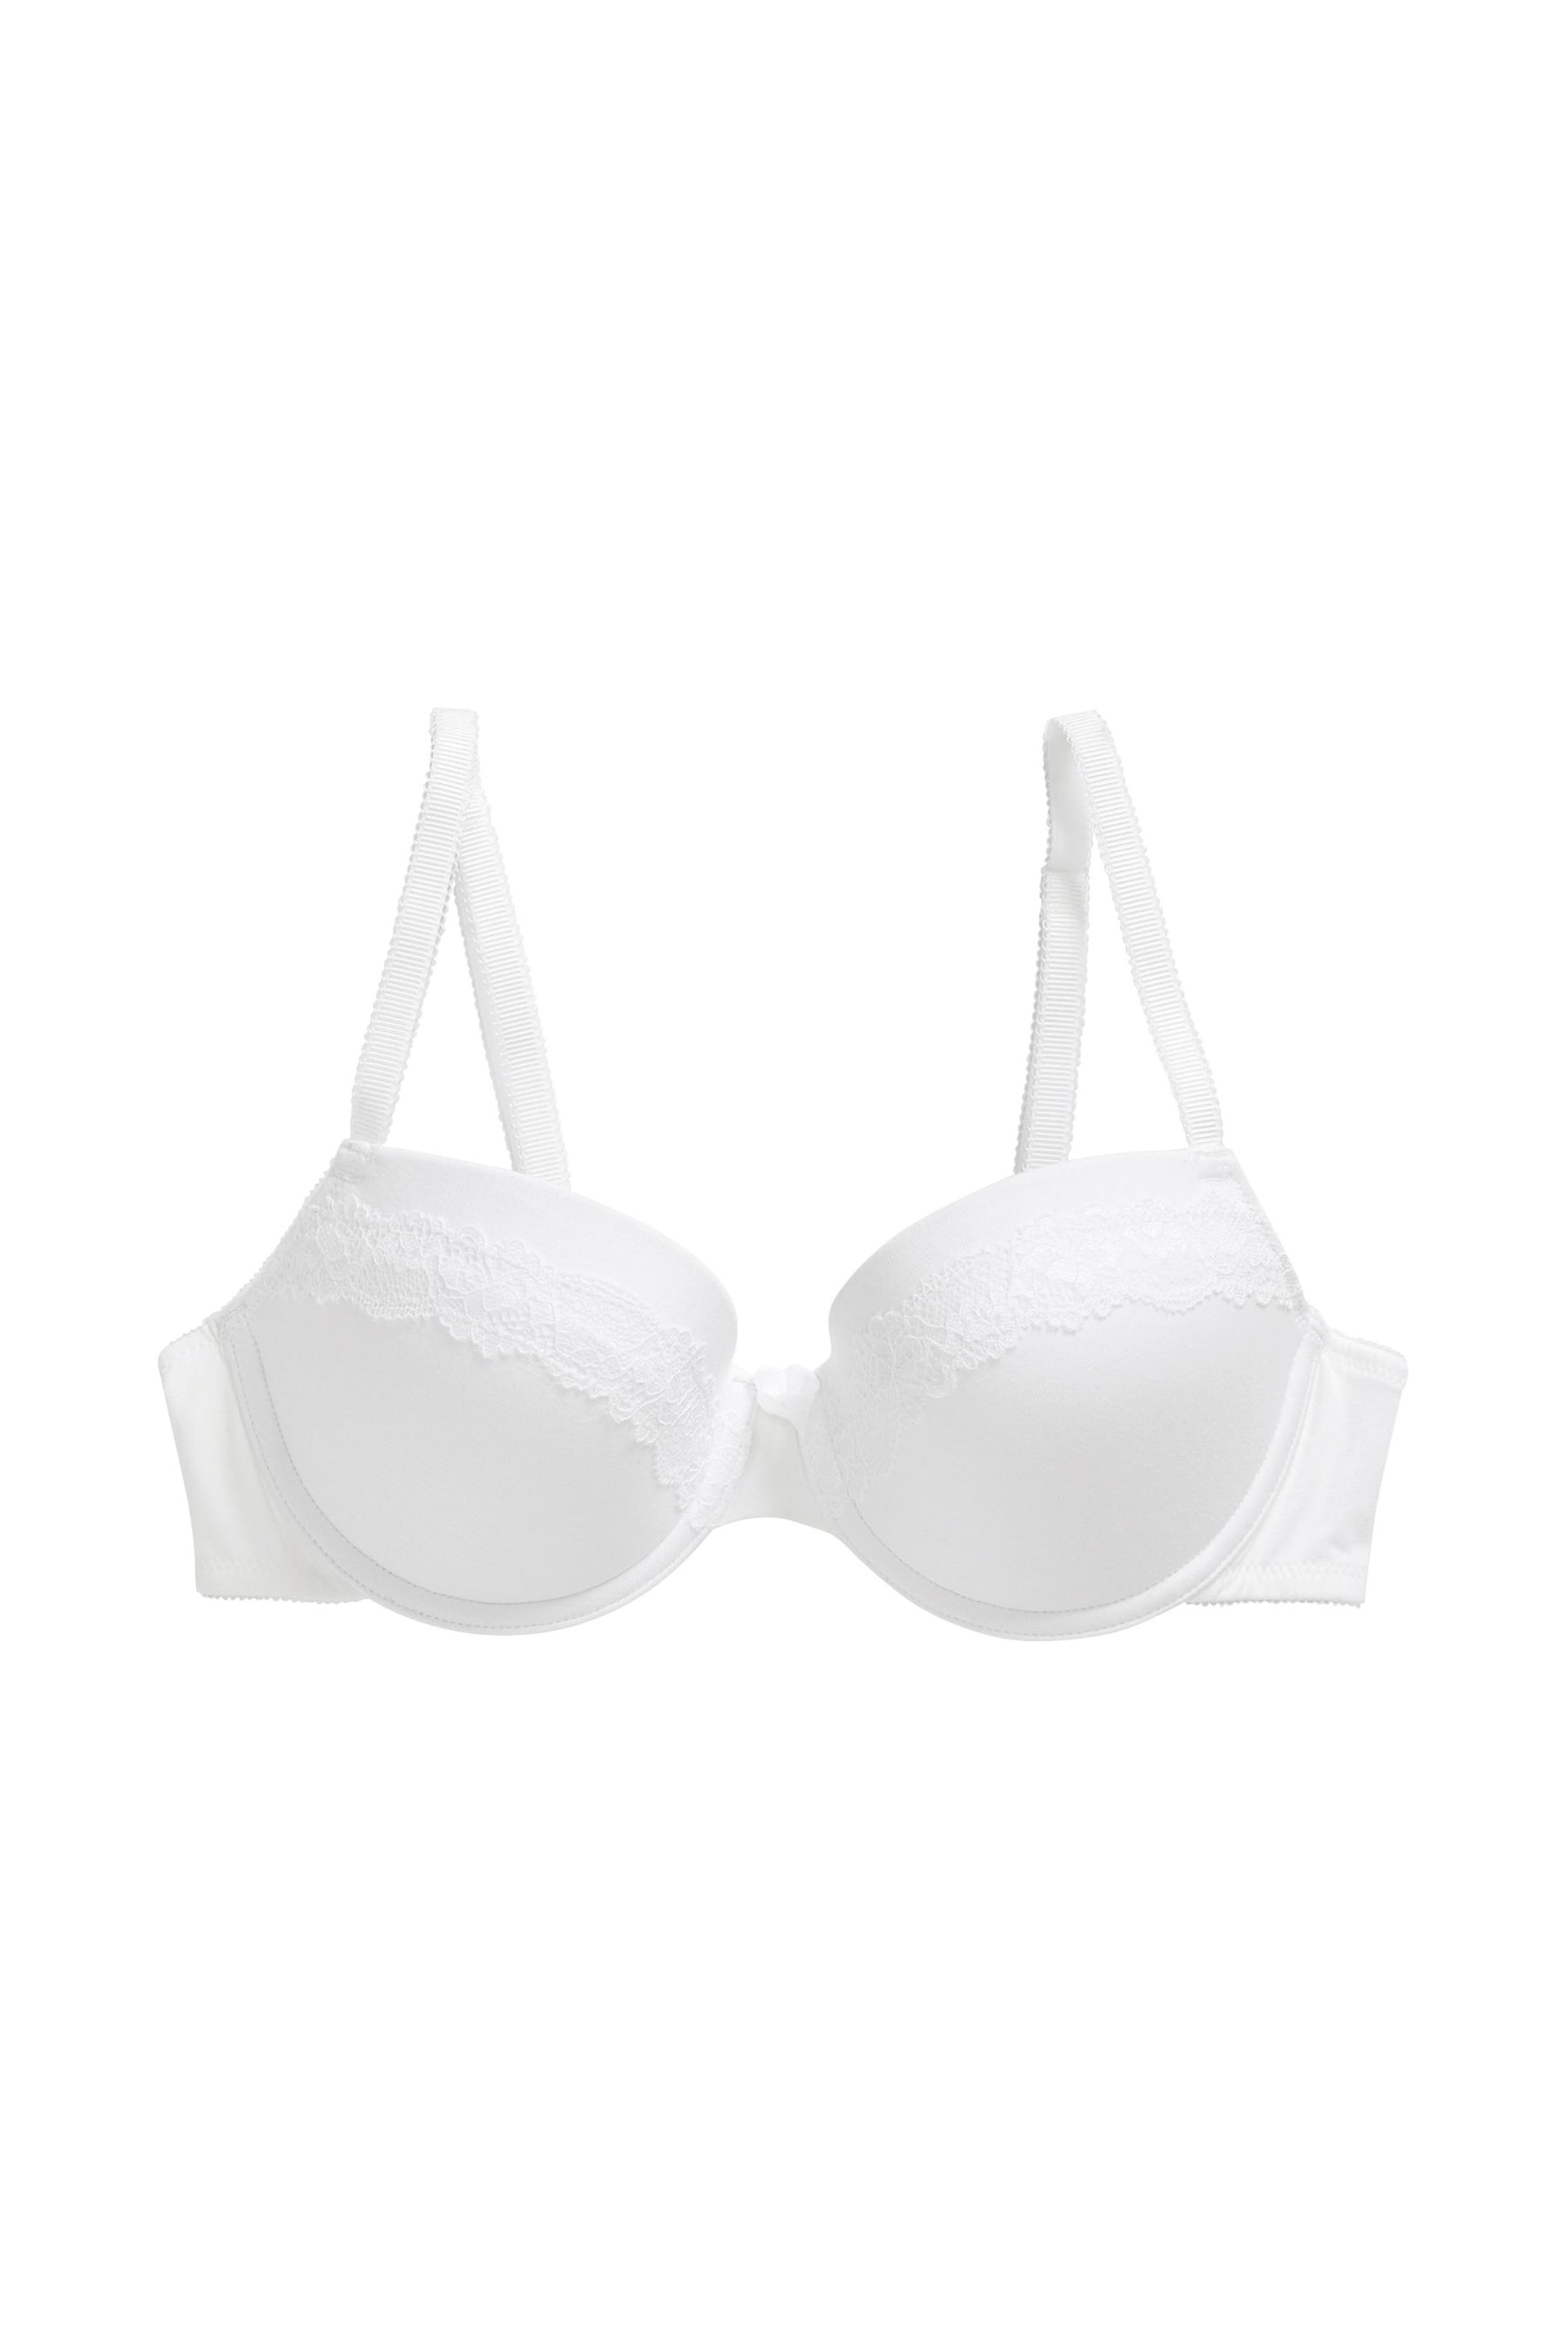 Black/White/Nude Push Up Pad Balcony Cotton Blend Bras 3 Pack - Image 4 of 5